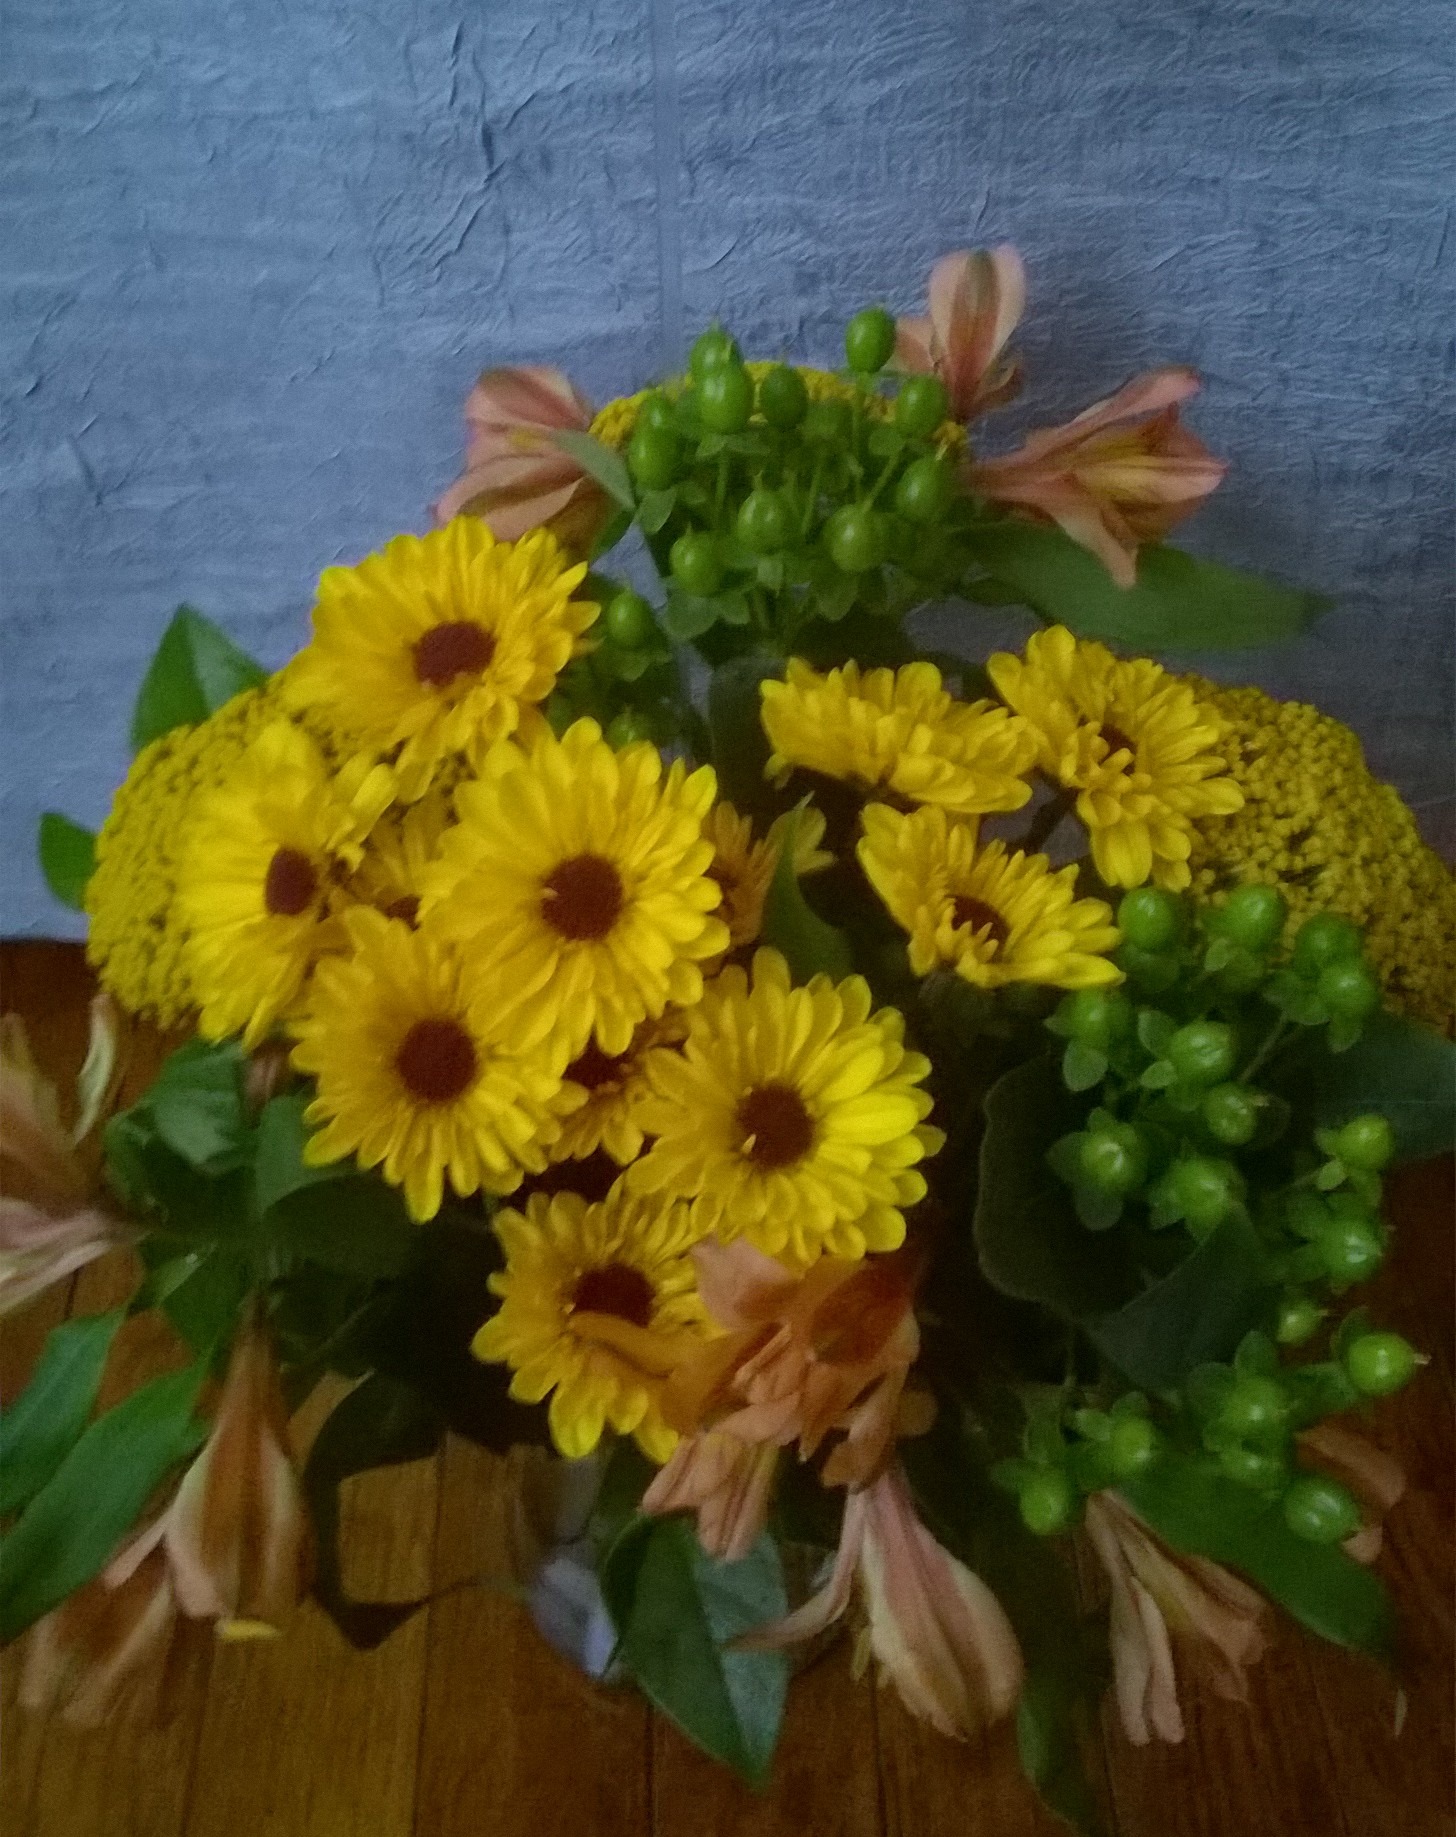 Flowers By Mail Reviews : Social Flowers: Flower Delivery Without